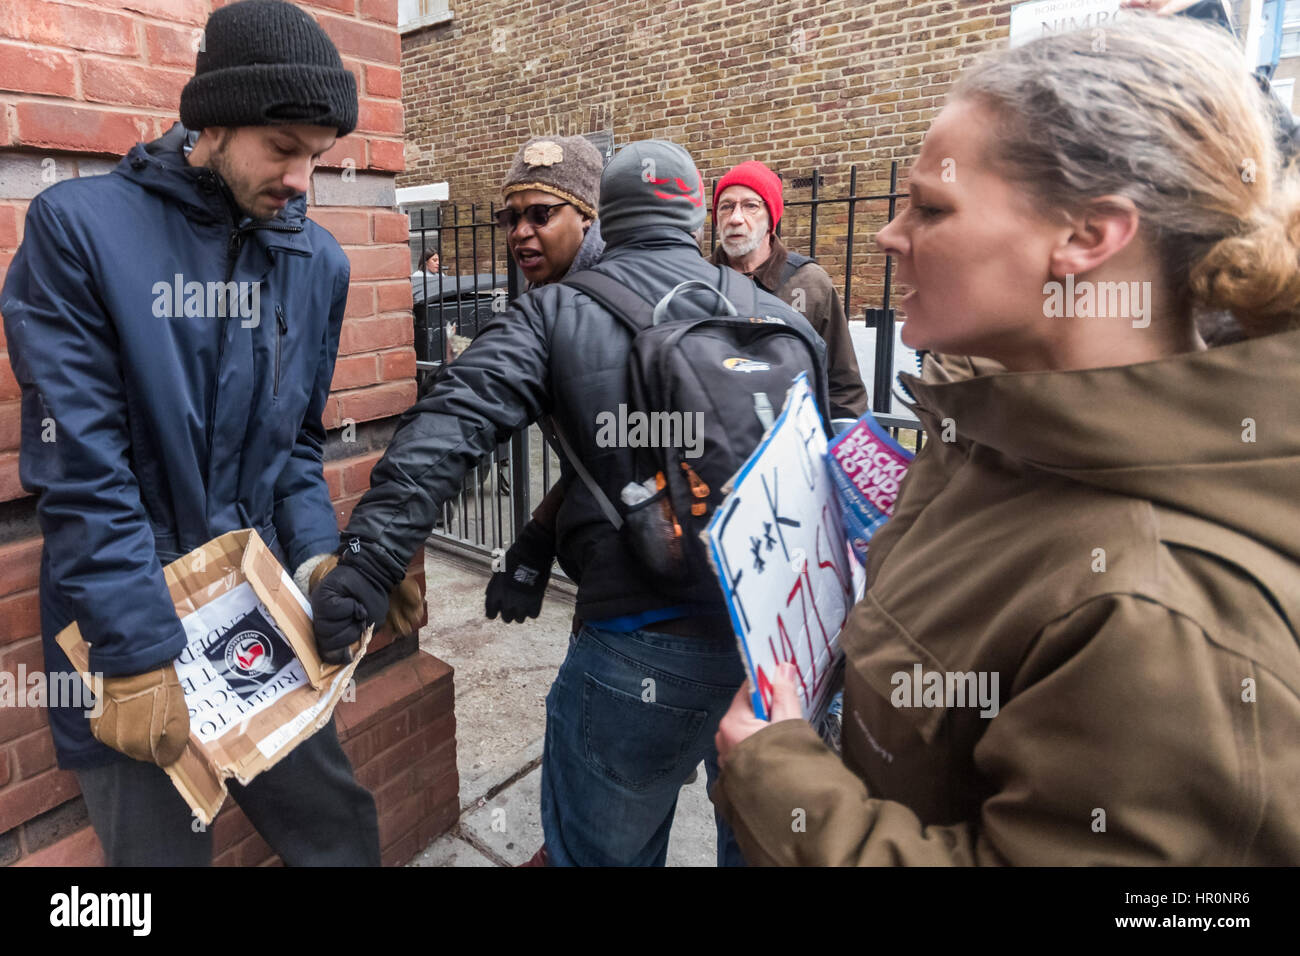 London, UK. 25th February 2017.  Protesters try to grab a poster from a man outside the LD50  gallery in Dalston who says he has come to defend that the right to freely discuss ideas, even repulsive ones. He was shouted at by protesters and eventually police took him aside and advised him to leave. Several hundred people from East London had gathered outside the  gallery which they say has promoted fascists, neo-Nazis, misogynists, racists and Islamophobes in one of London's more diverse areas. Credit: Peter Marshall/Alamy Live News Stock Photo